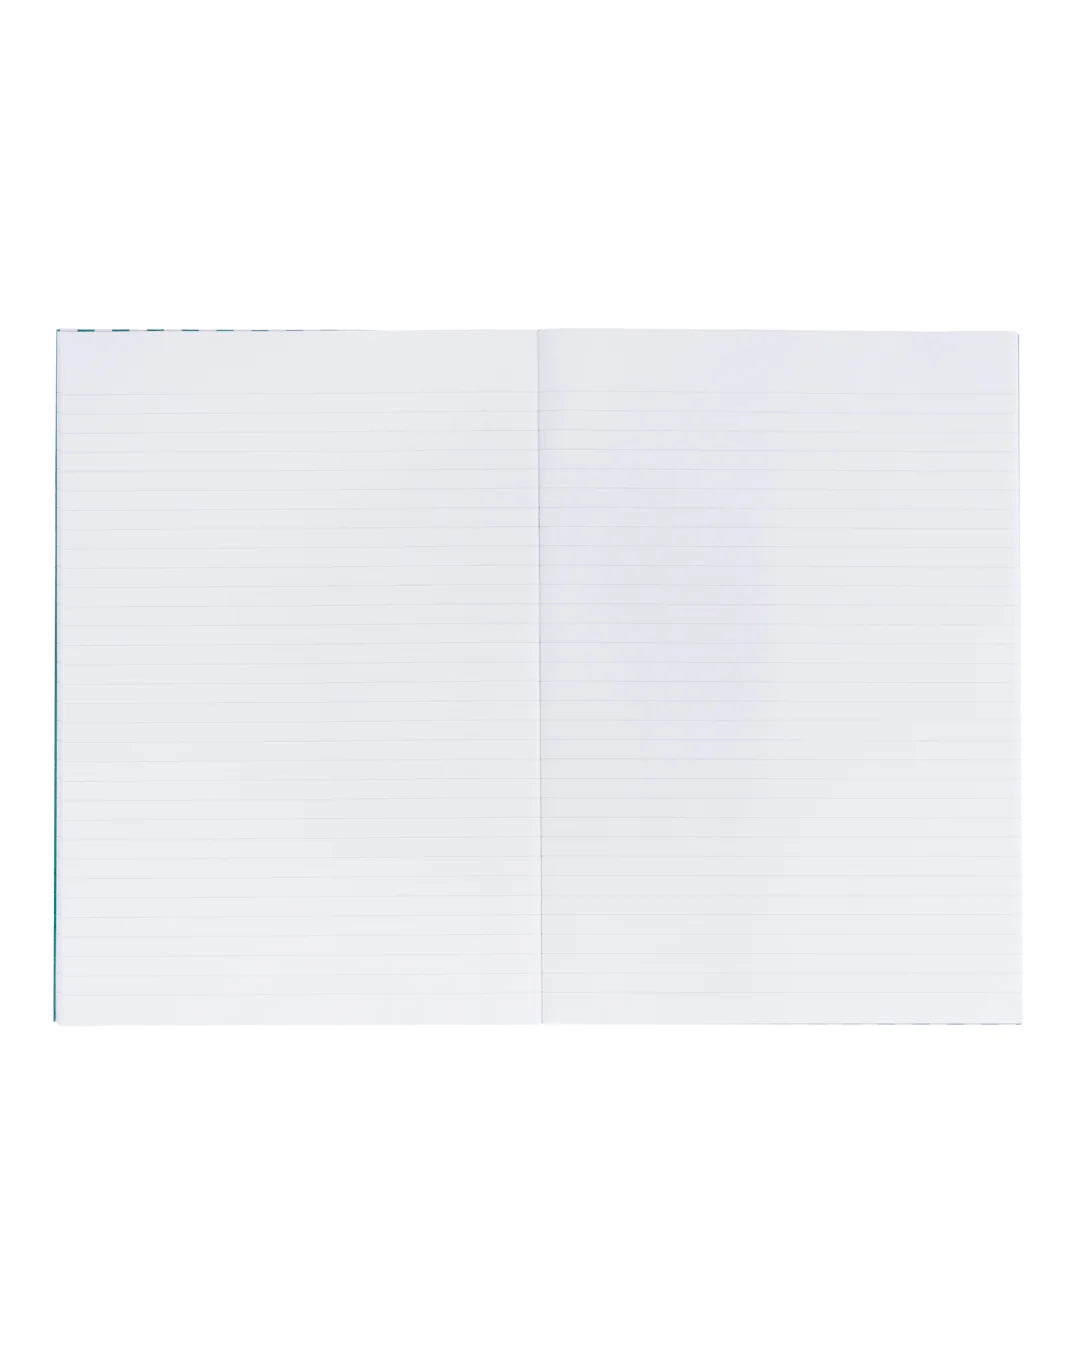 An image of the inside of a ruled A4 notebook.